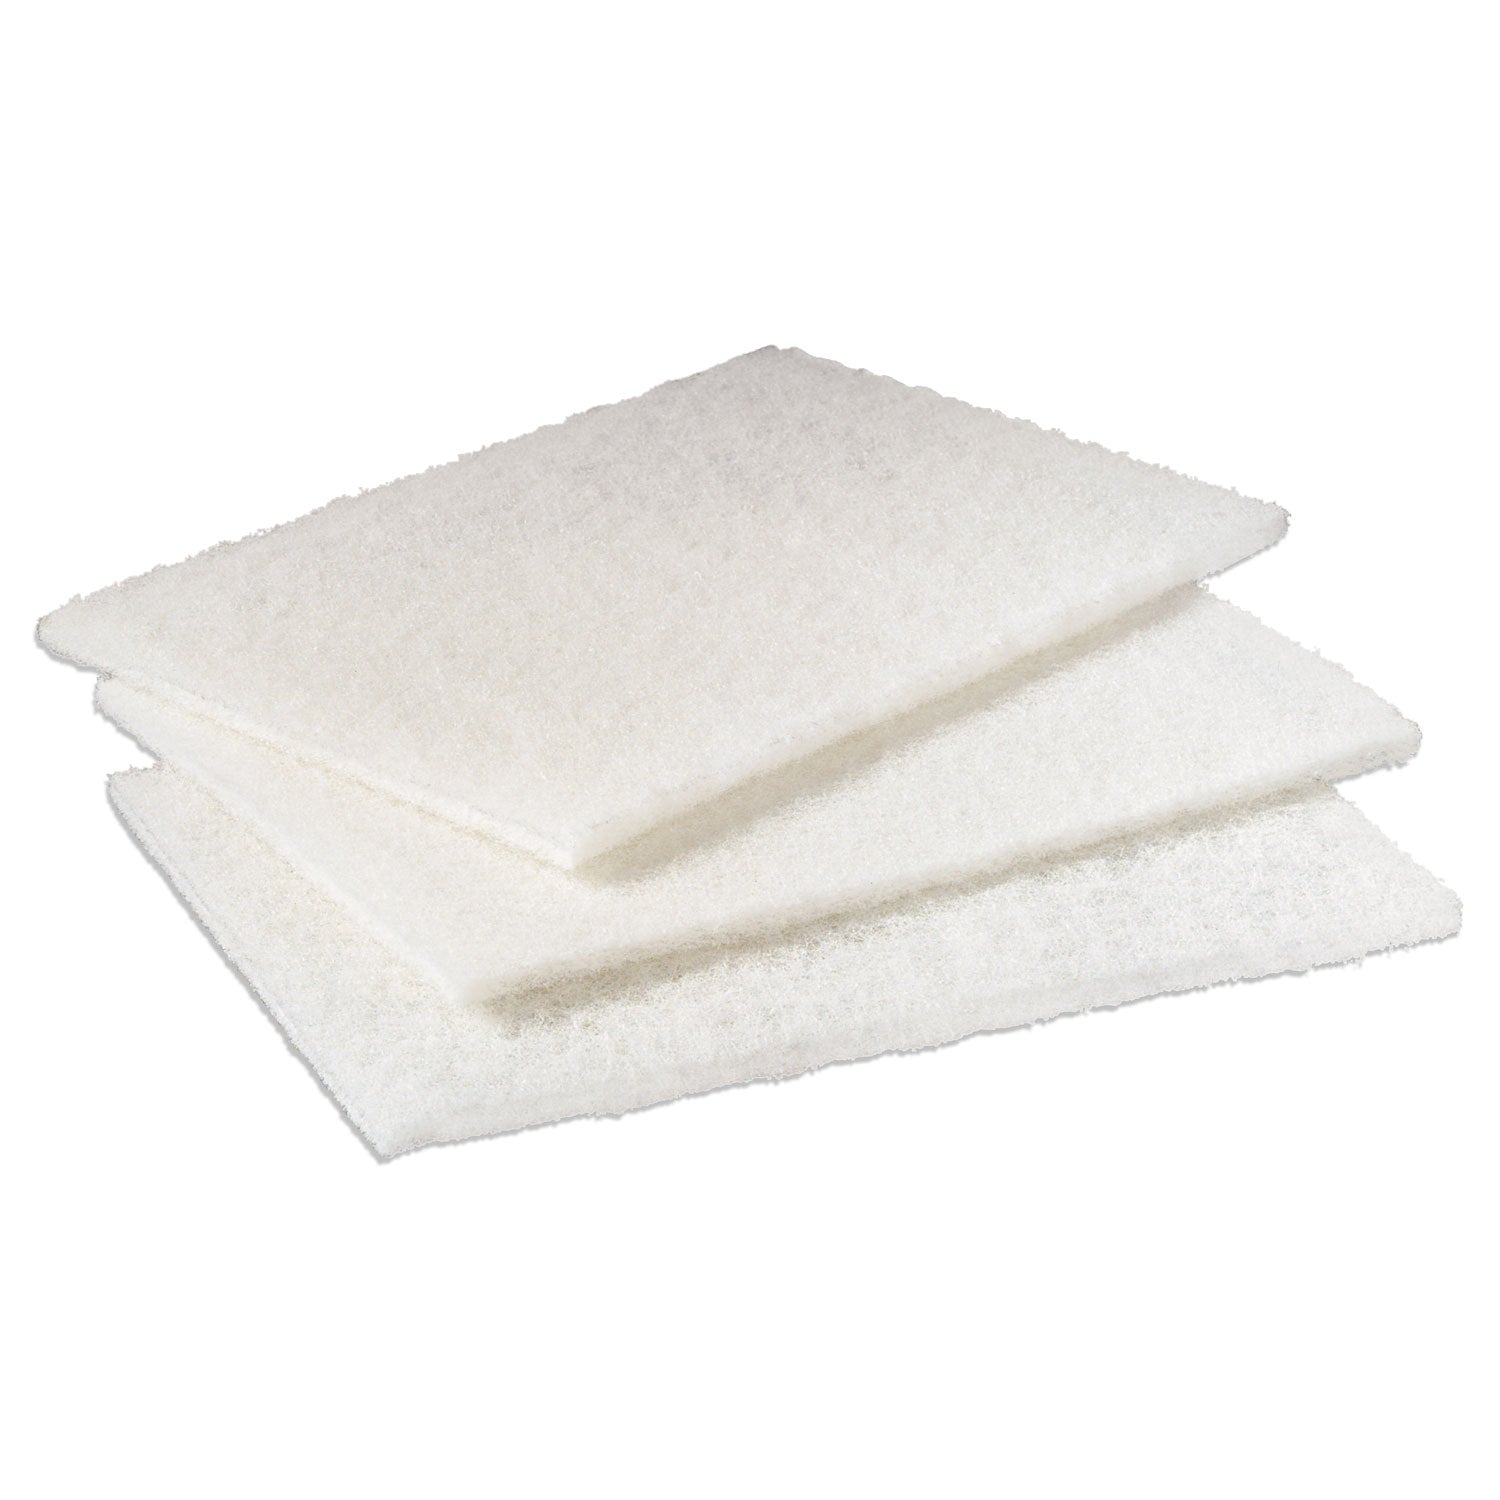 Light Duty Cleansing Pad, 6 x 9, White, 20/Pack, 3 Packs/Carton - 